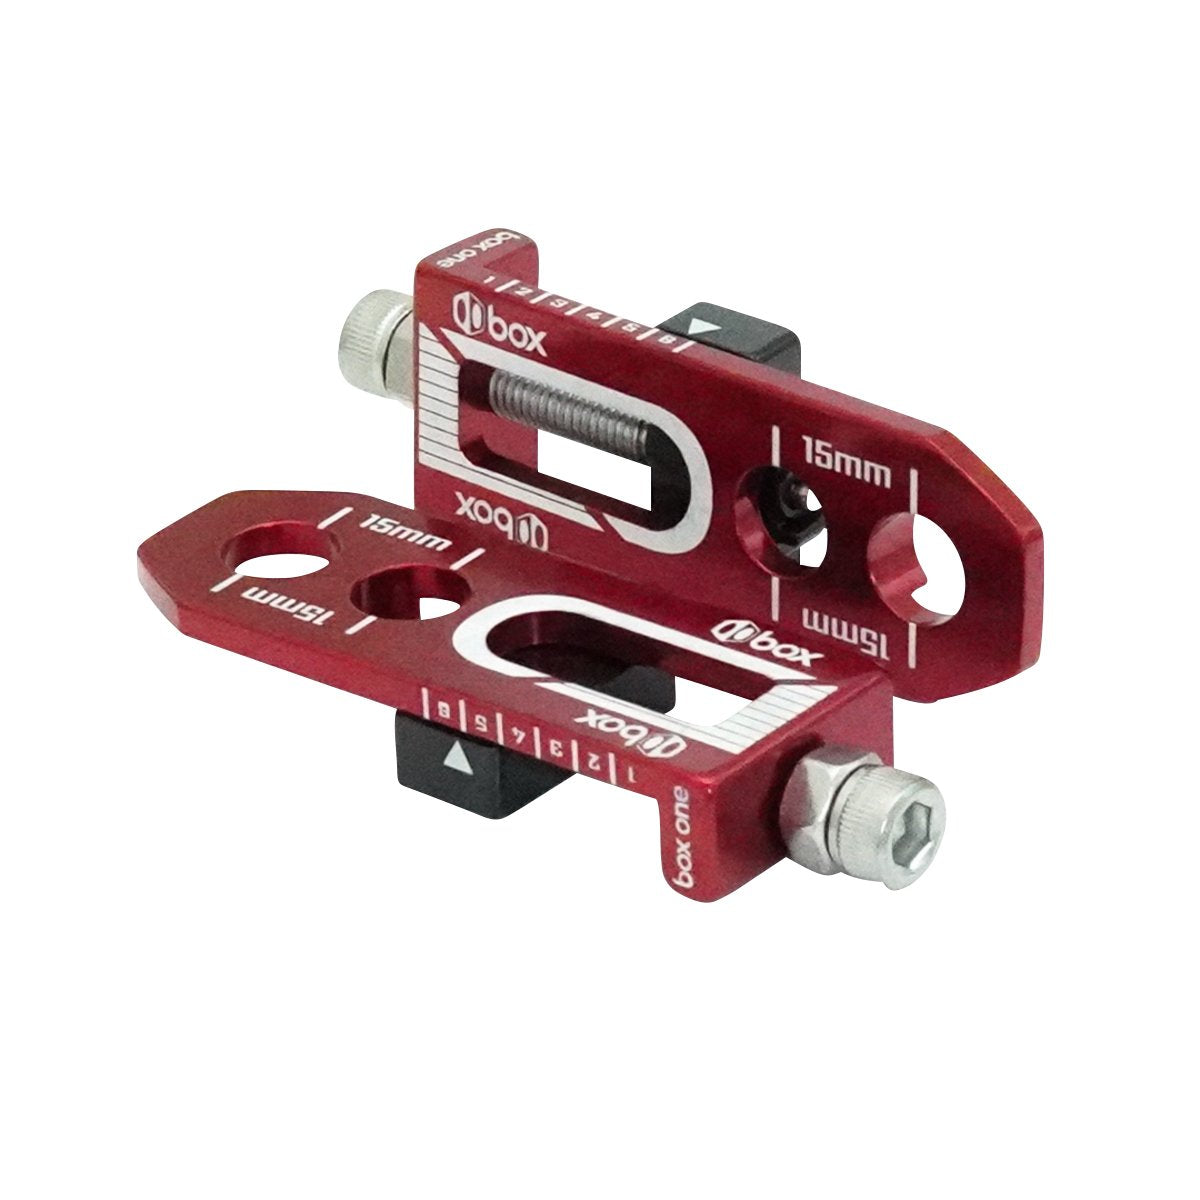 Box One 3/8" BMX Chain Tensioners - Pair - Red